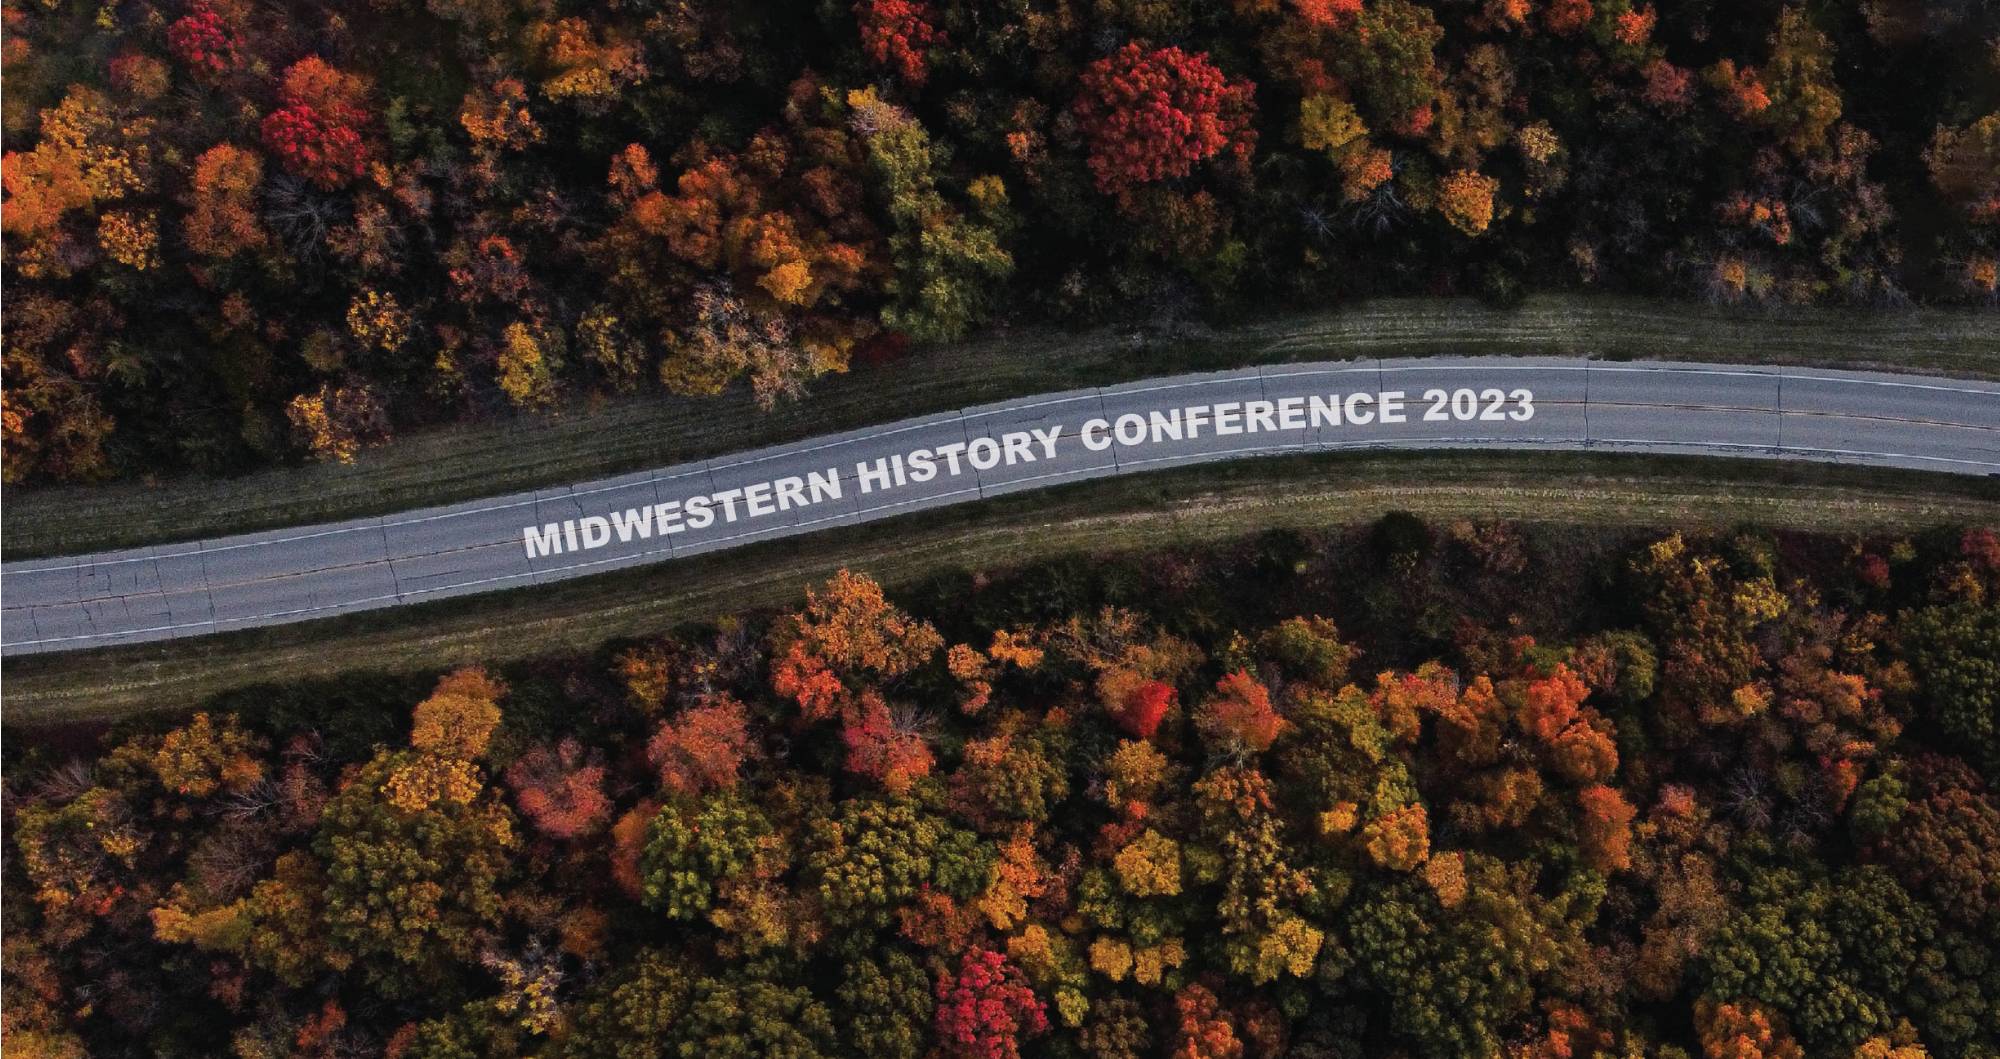 Midwest conference 2023